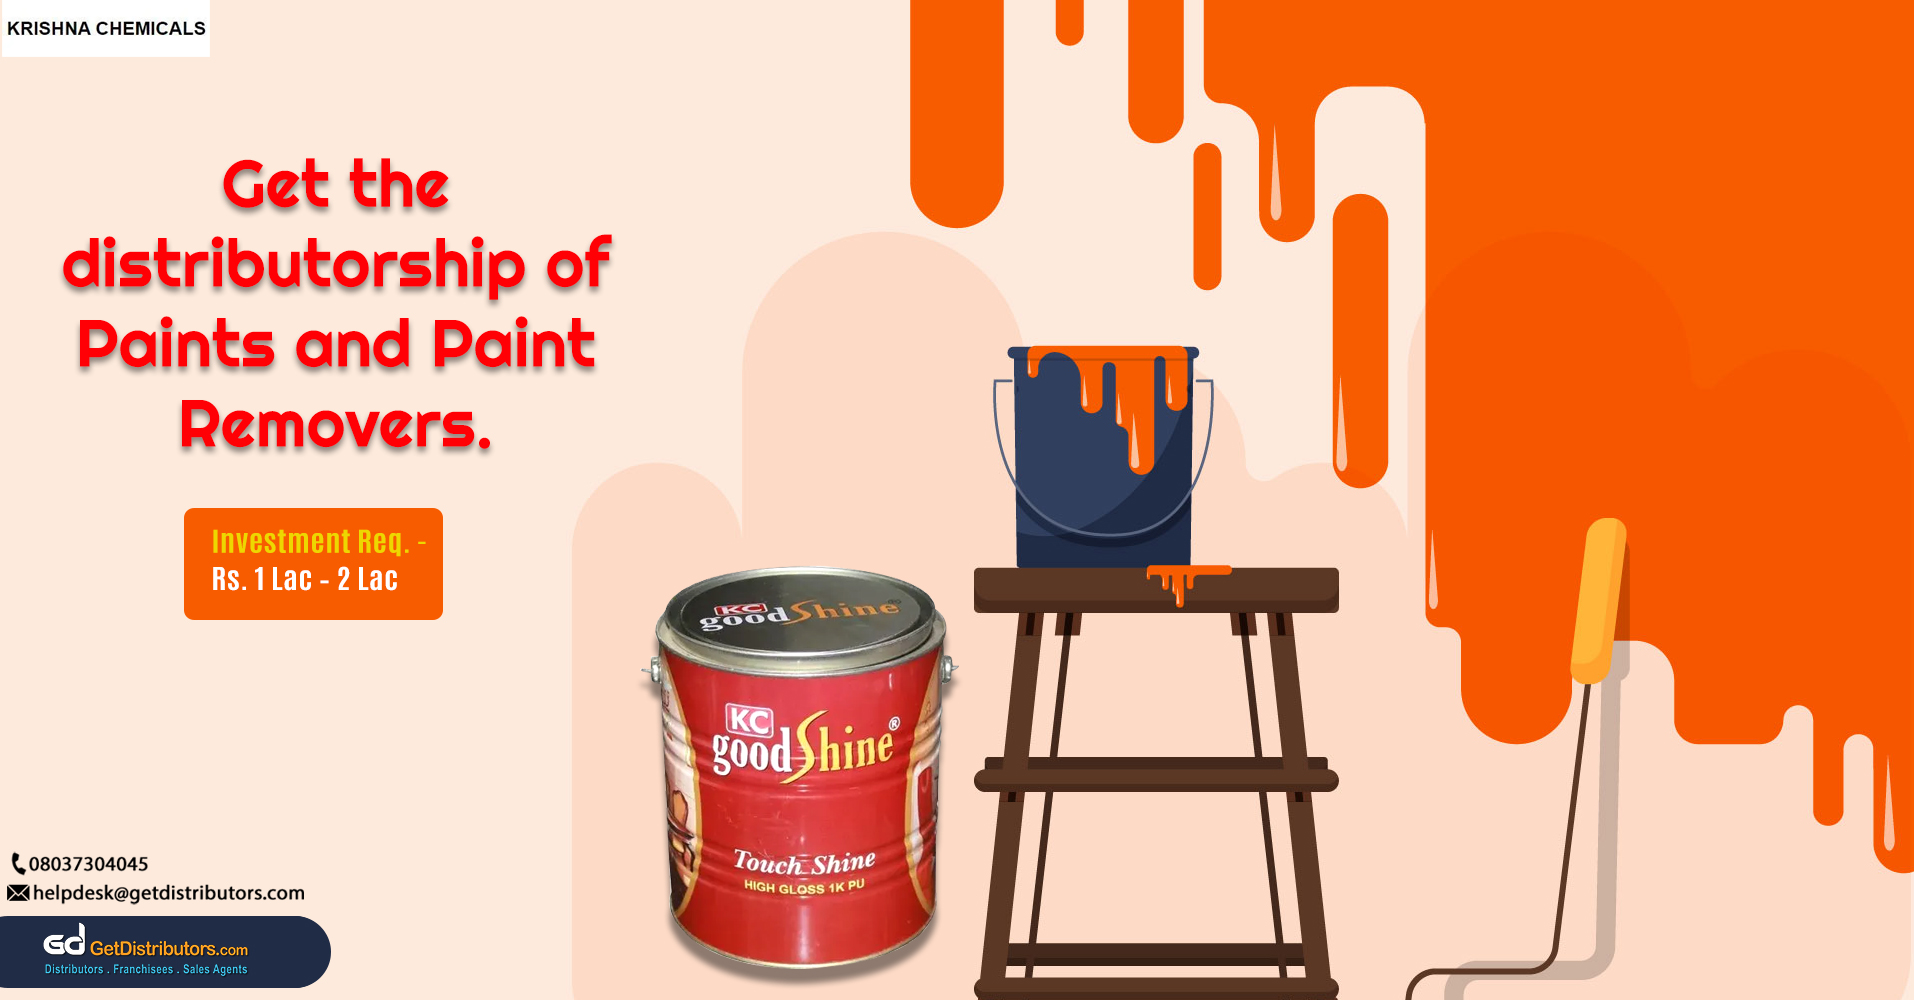 A wide range of paints and removers for distribution